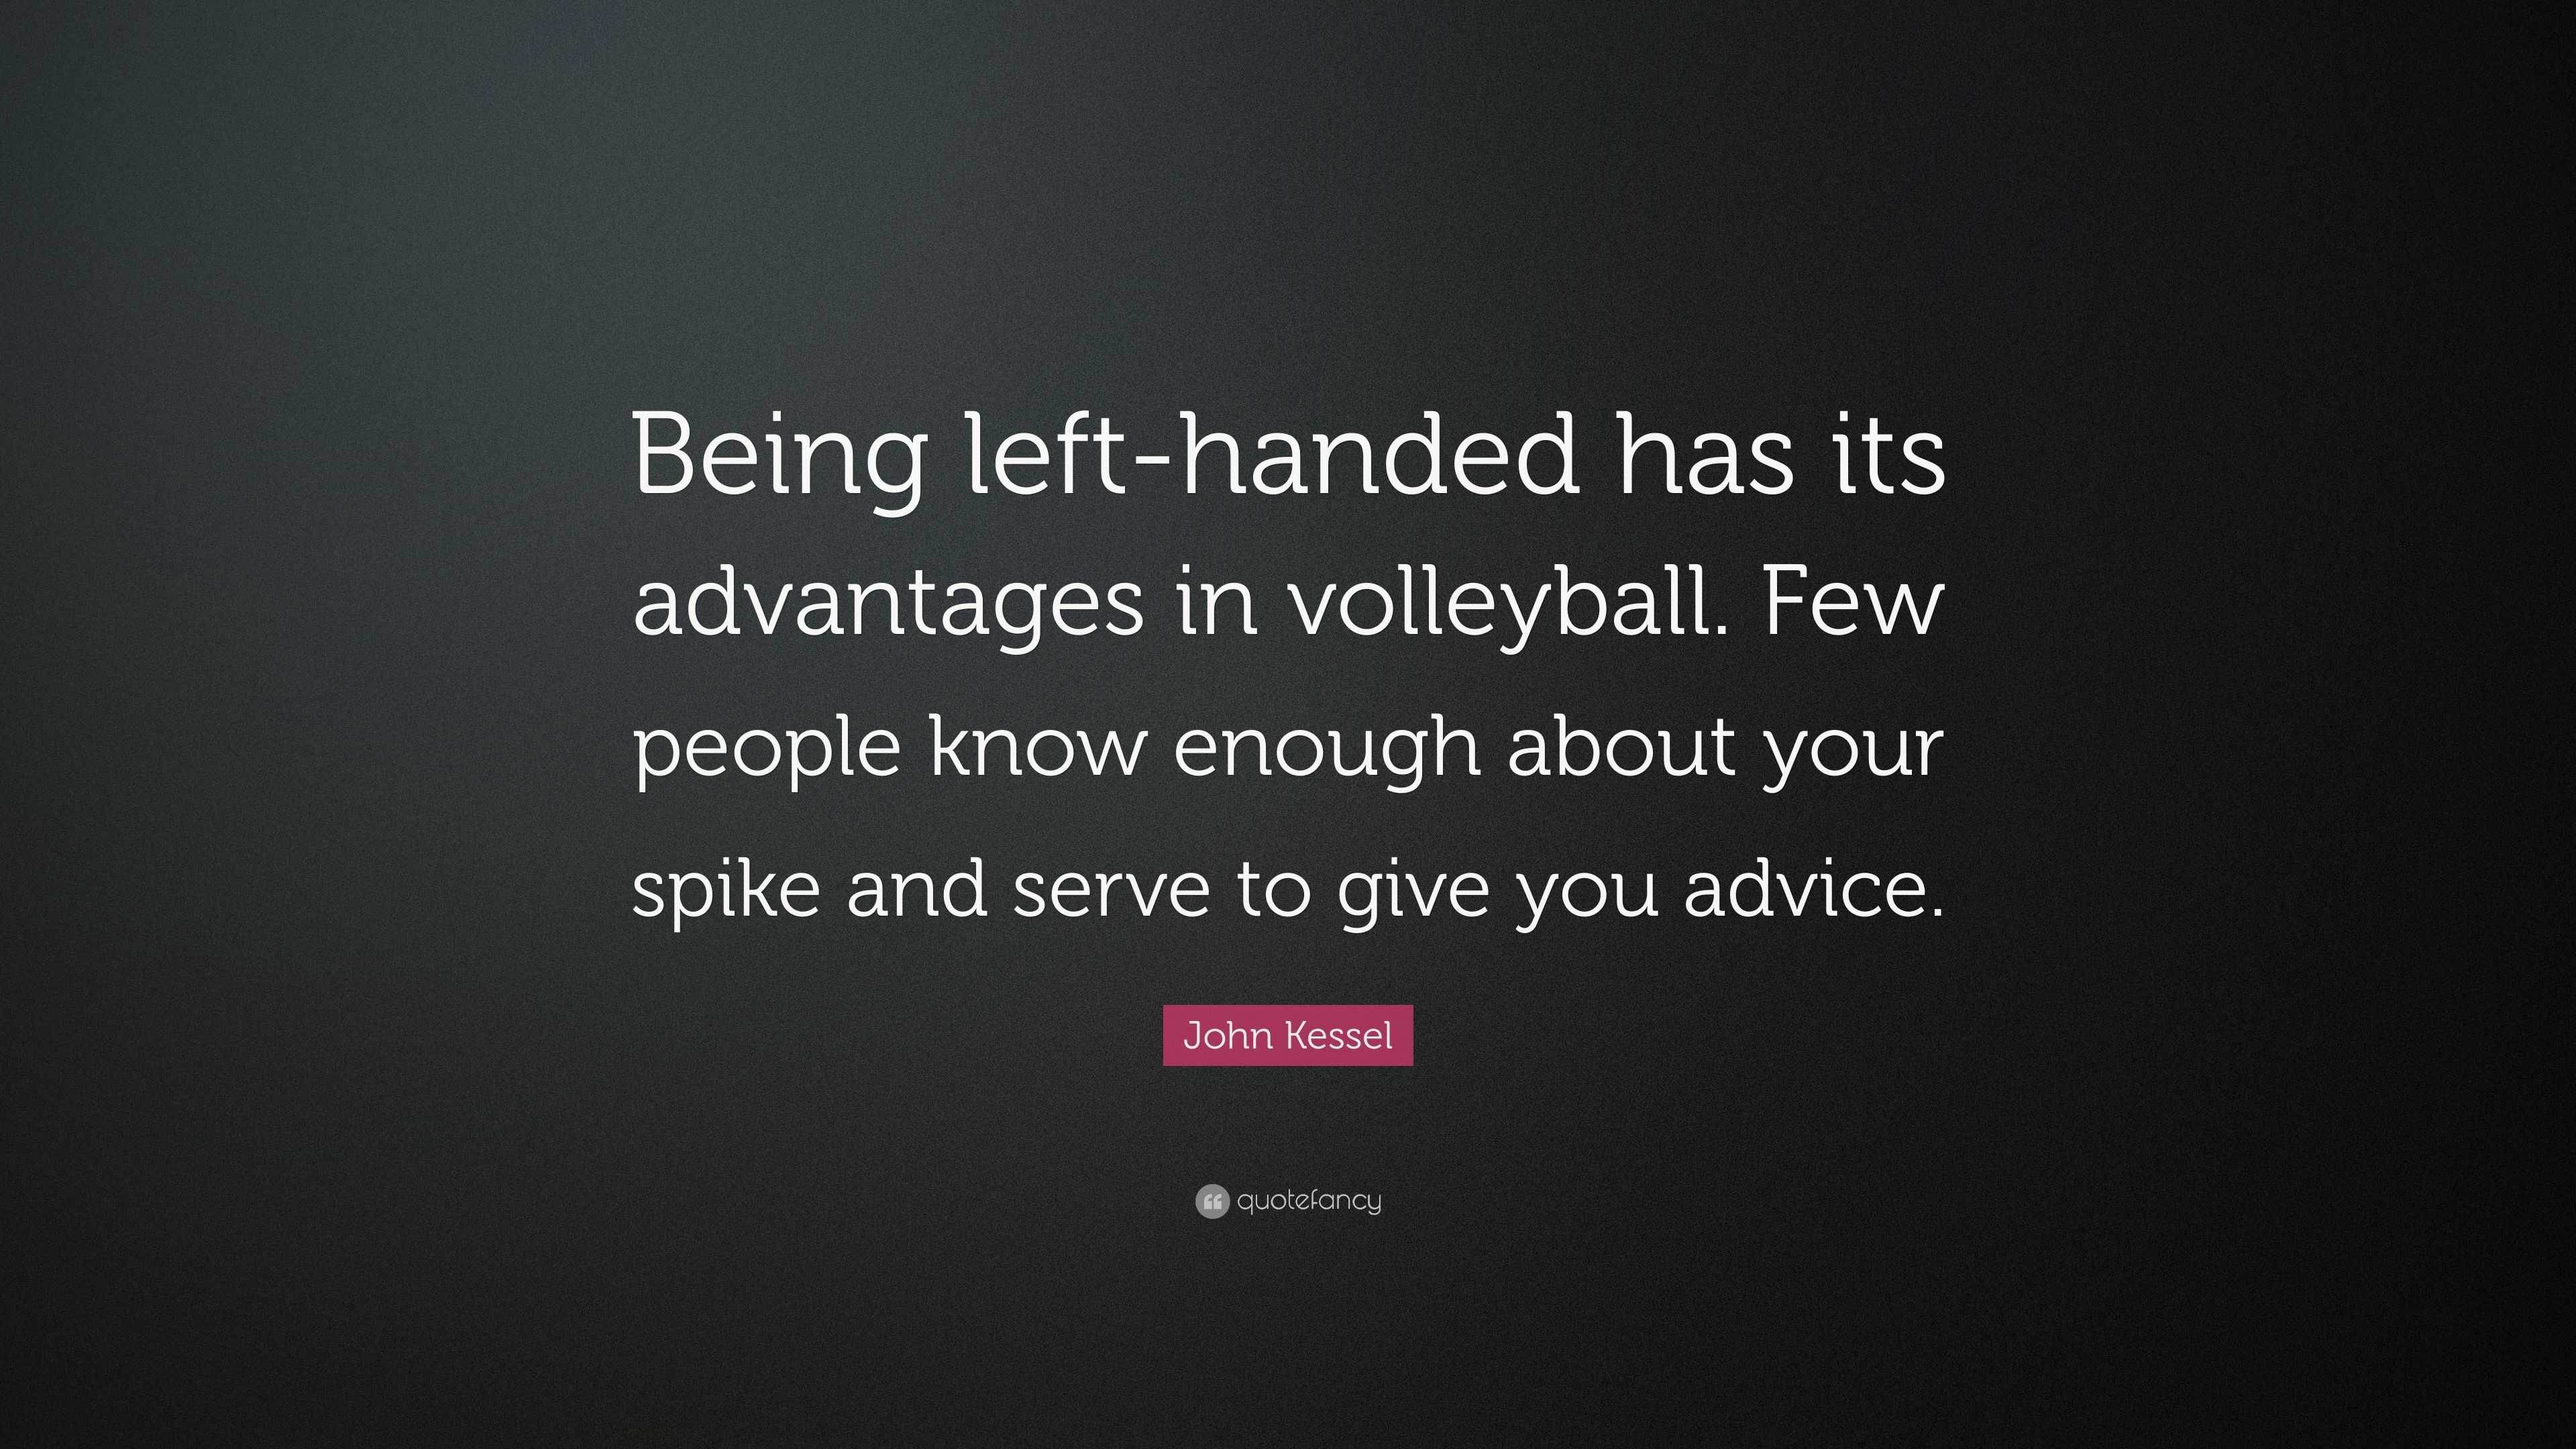 John Kessel Quote: “Being left-handed has its advantages in volleyball ...